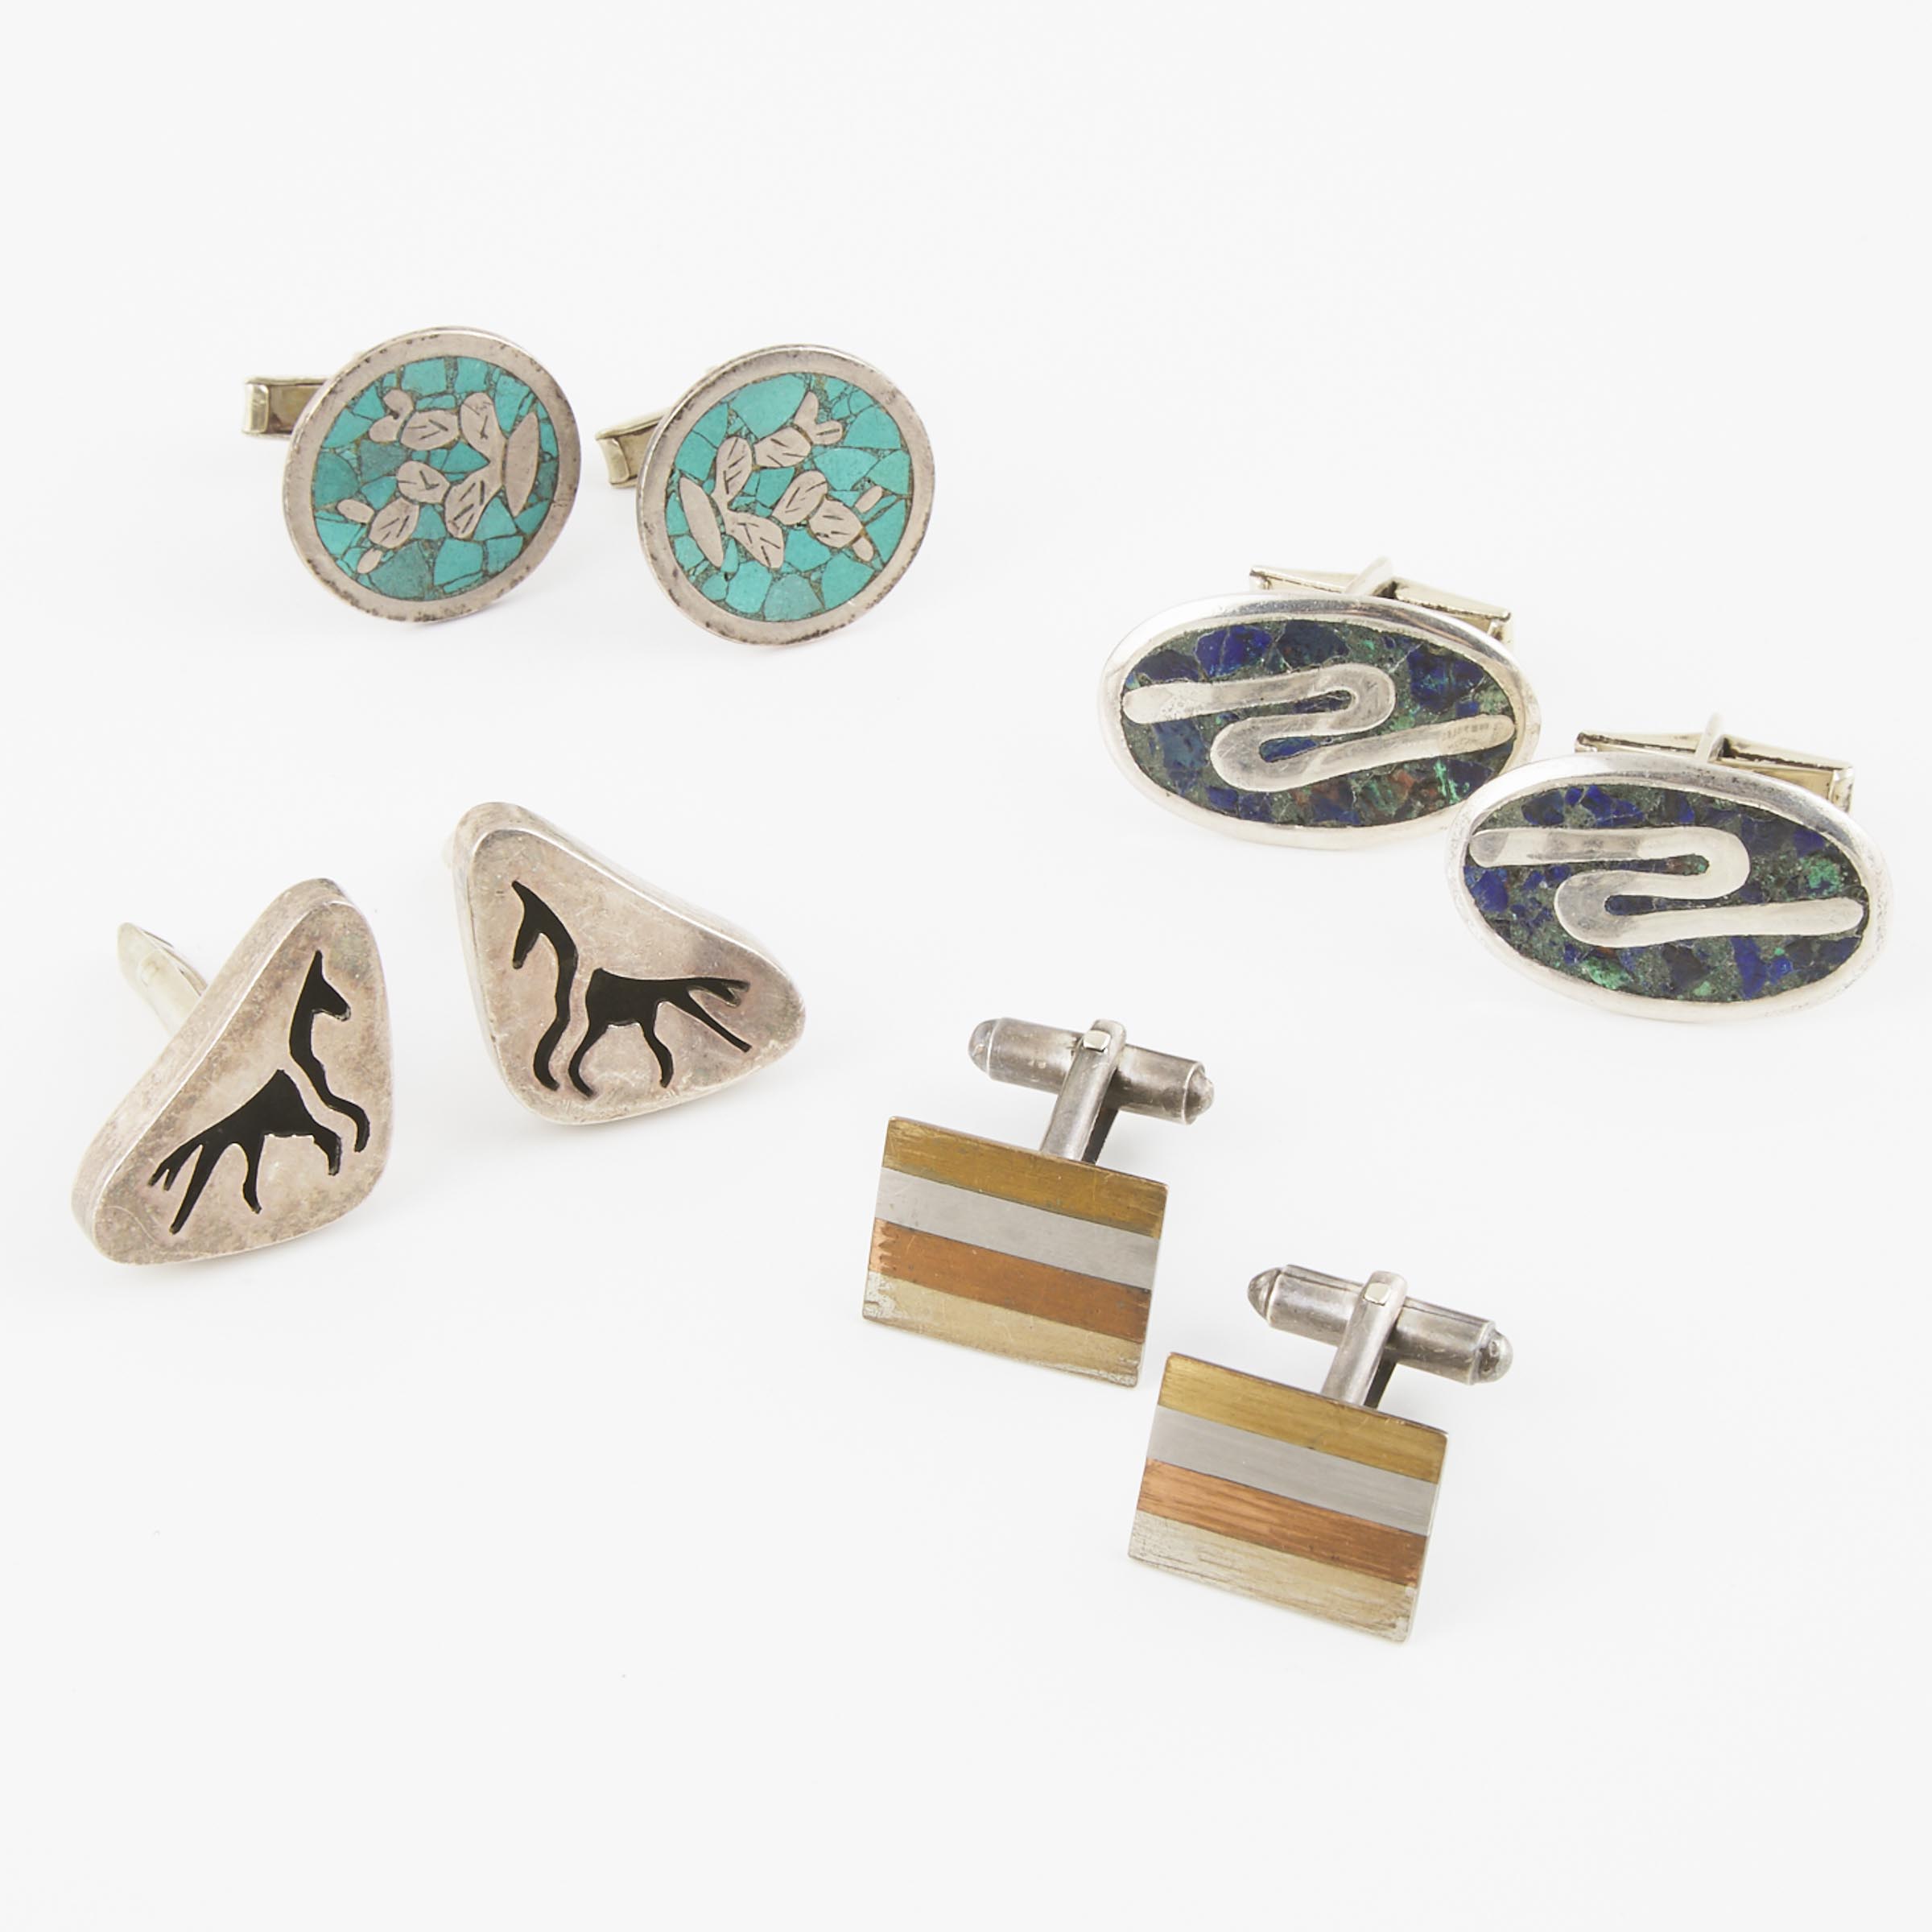 4 x Pairs Of Mexican Silver Cufflinks